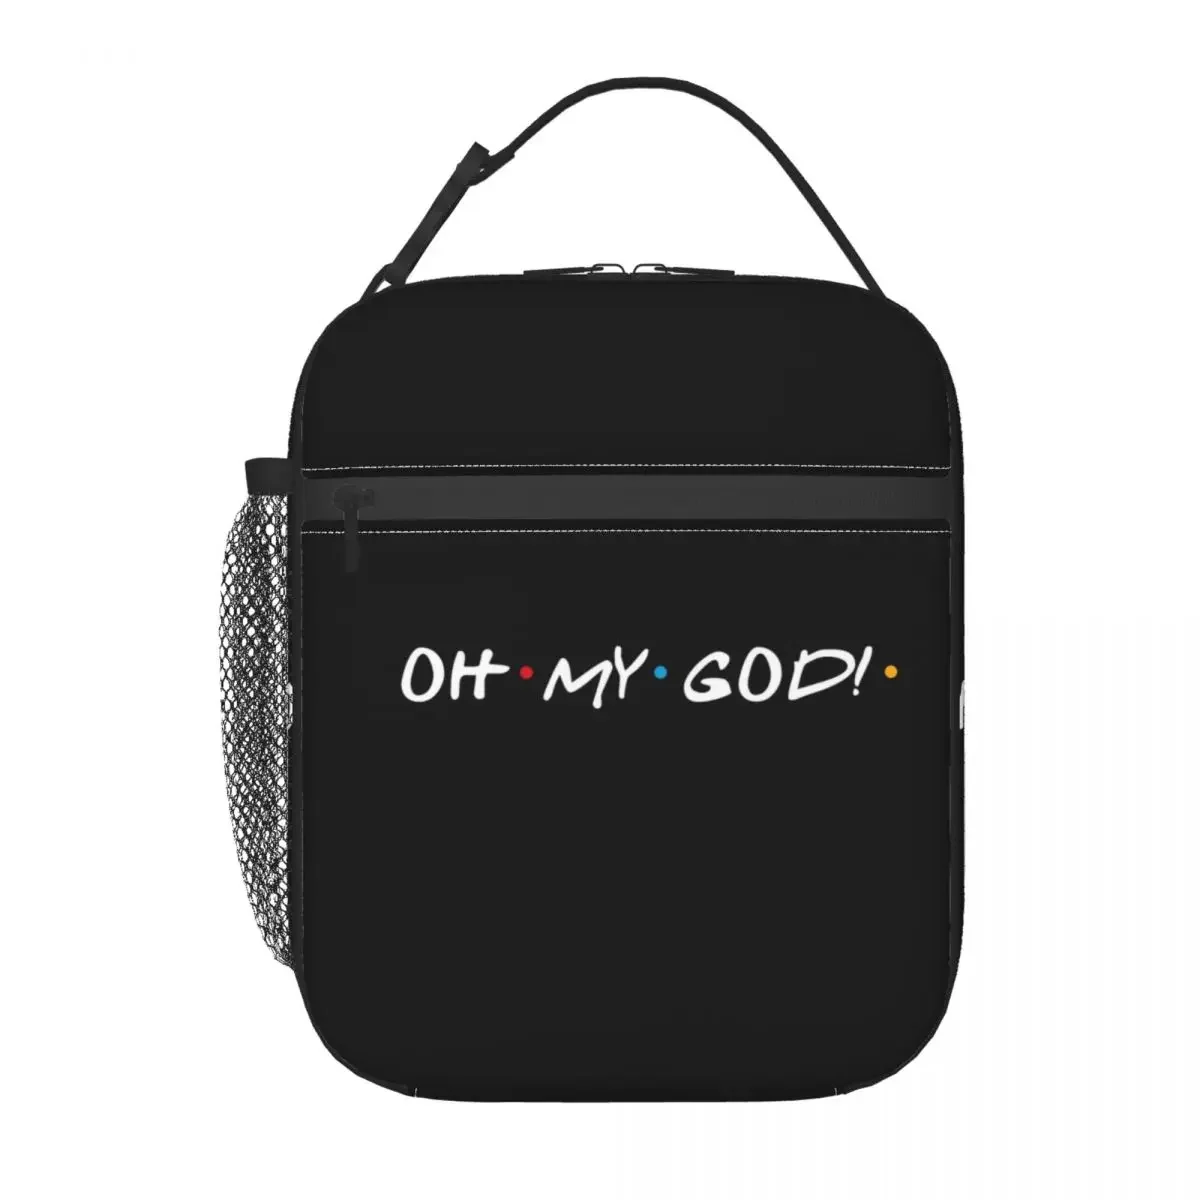 

Oh My God Insulated Lunch Bag for Women Leakproof Friends Funny Quote Cooler Thermal Lunch Box for Beach Camping Travel